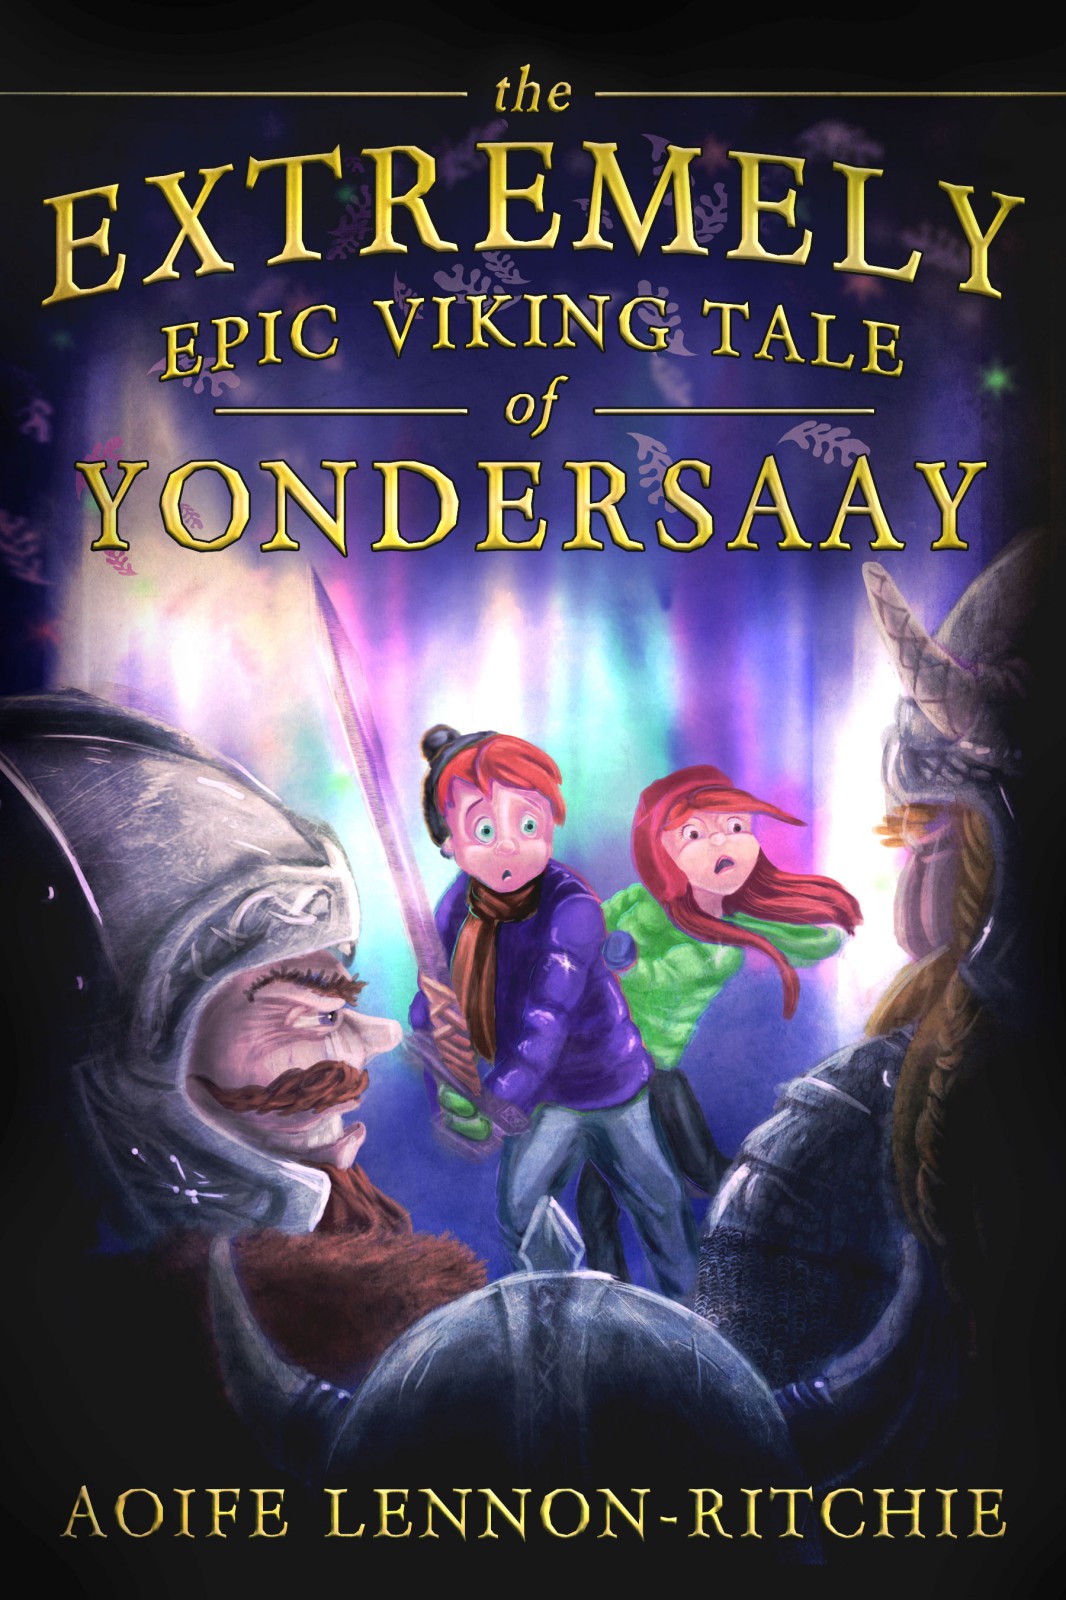 The Extremely Epic Viking Tale of Yondersaay by Aoife Lennon-Ritchie